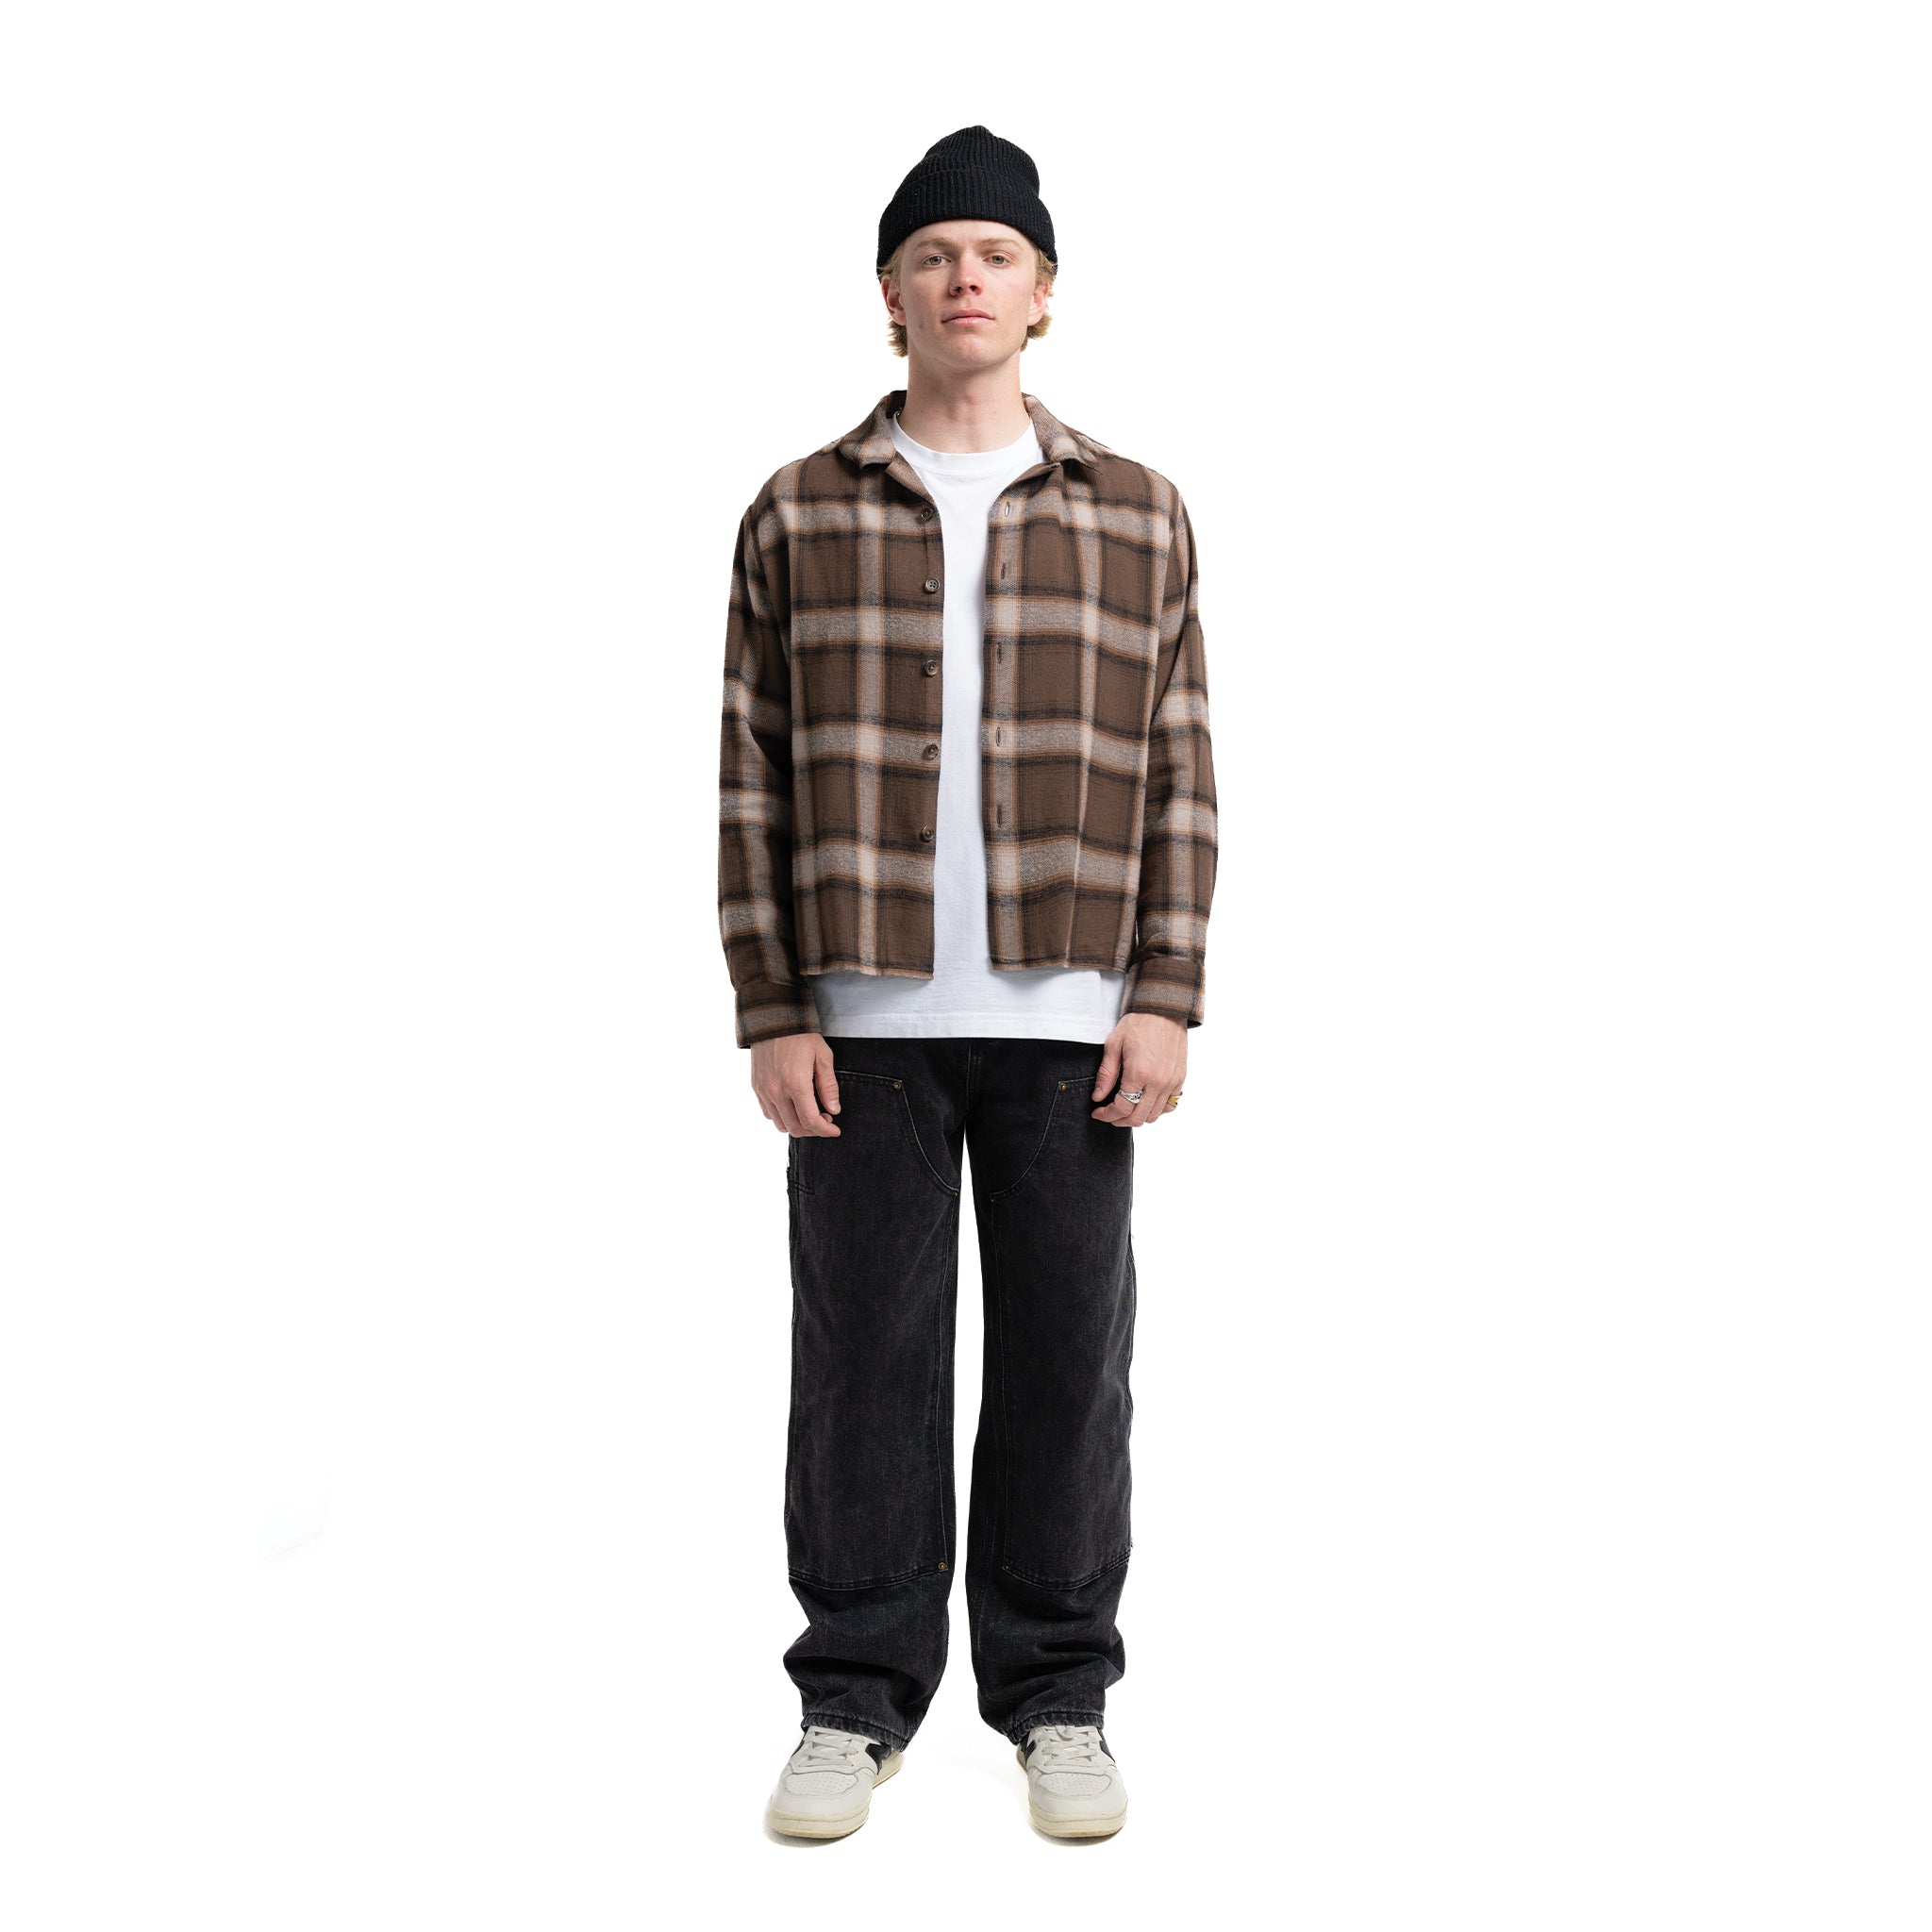 Cropped Open Collar Flannel Brown/Tan